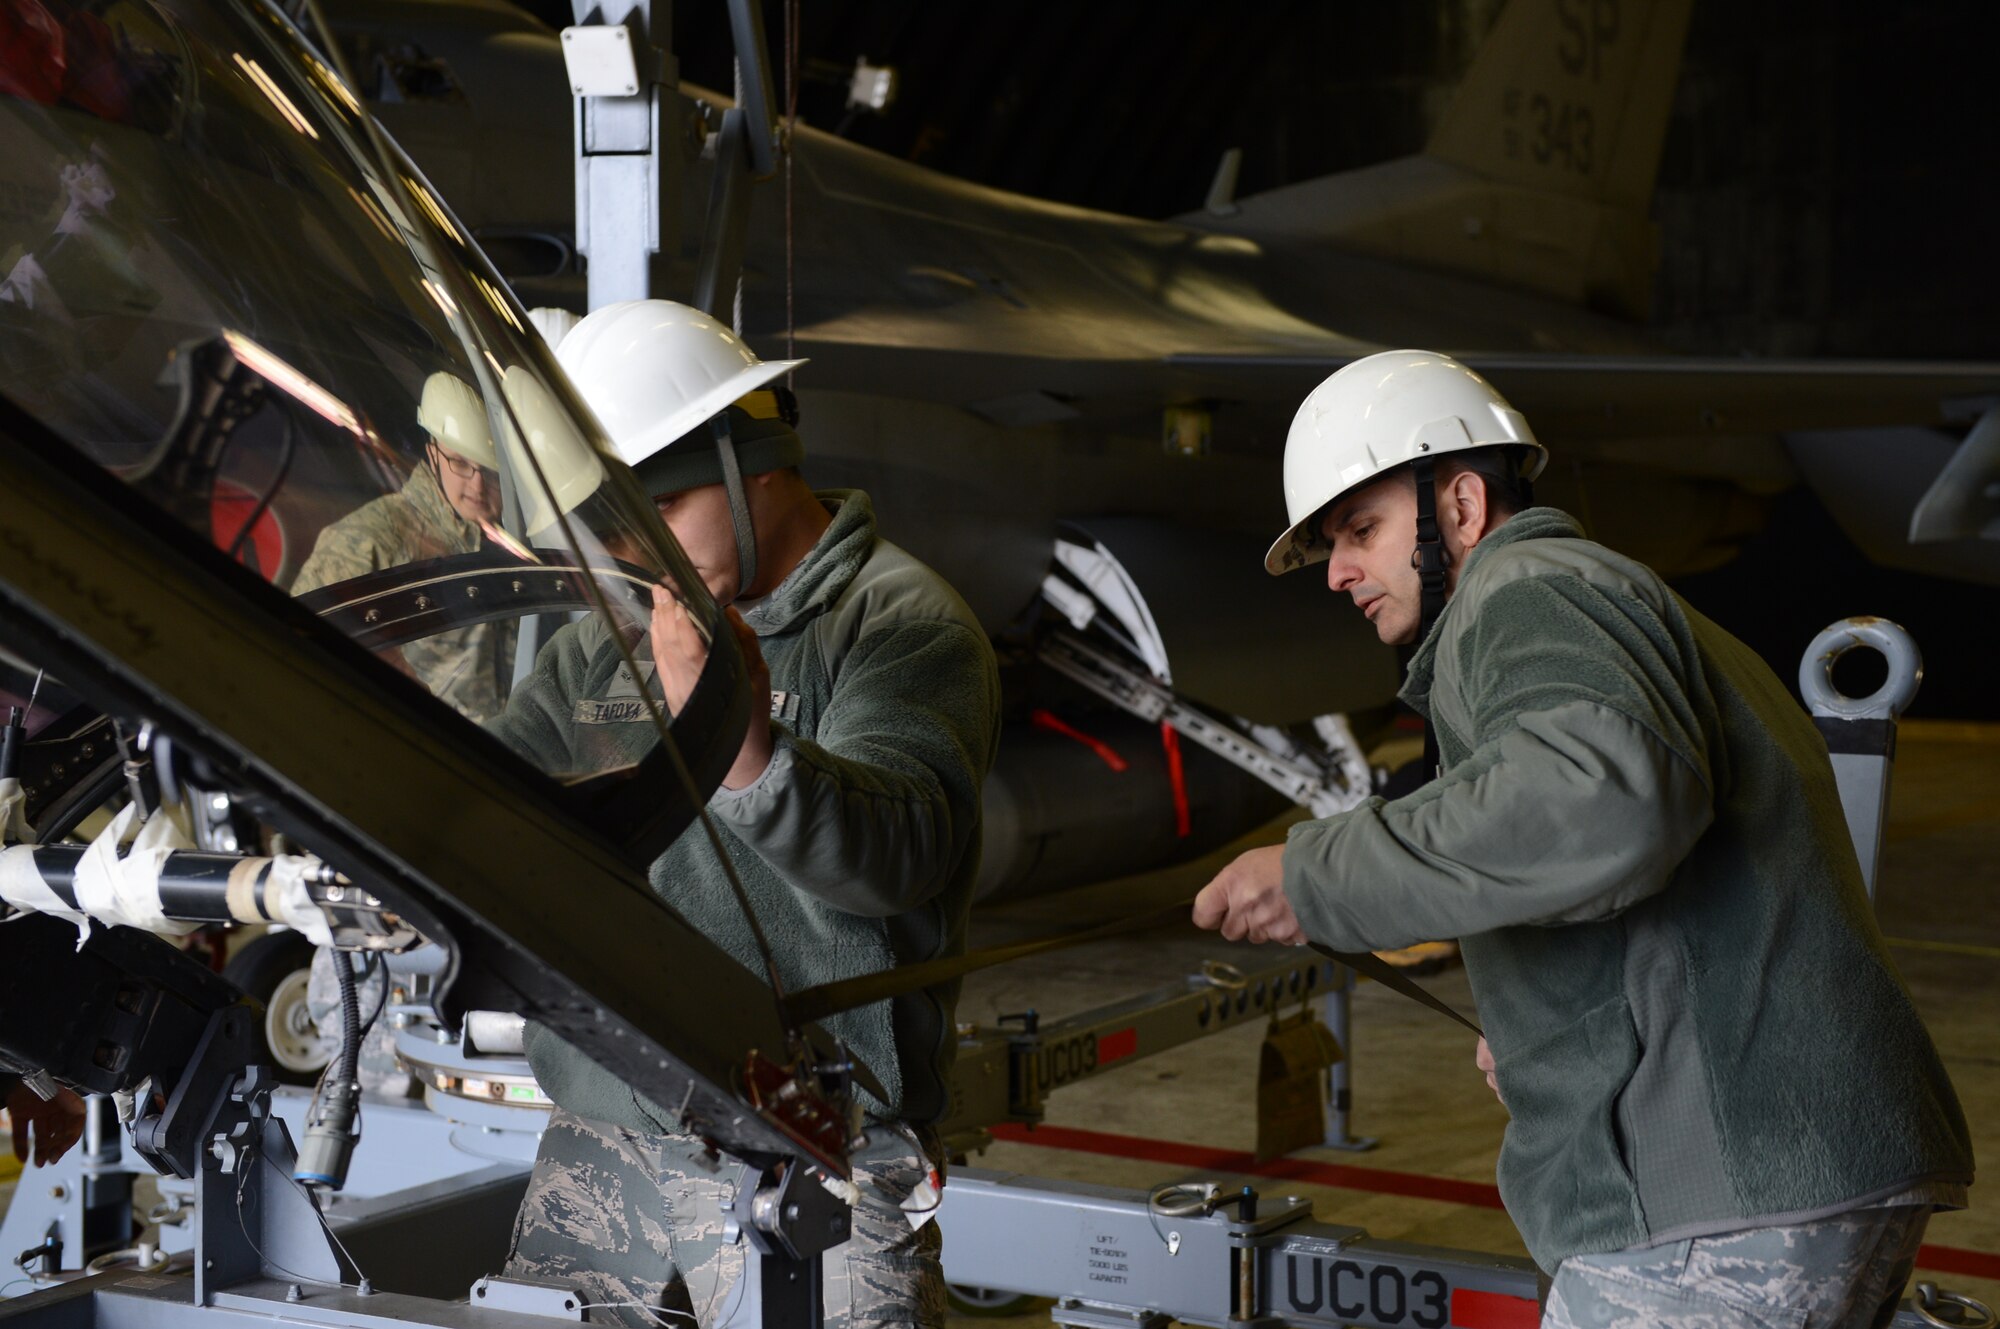 U.S. Air Force Col. David Julazadeh, 52nd Fighter Wing commander, helps Airman 1st Class Nathaniel Tafoya, 52nd Component Maintenance Squadron egress journeyman from Prescott, Ariz., remove an F-16 Fighting Falcon fighter aircraft canopy at Spangdahlem Air Base, Germany, Feb. 10, 2014. The 52nd CMS removed the canopy to replace the detonator transfer assembly lines which are replaced approximately every 16 years. (U.S. Air Force photo by Airman 1st Class Kyle Gese/Released)